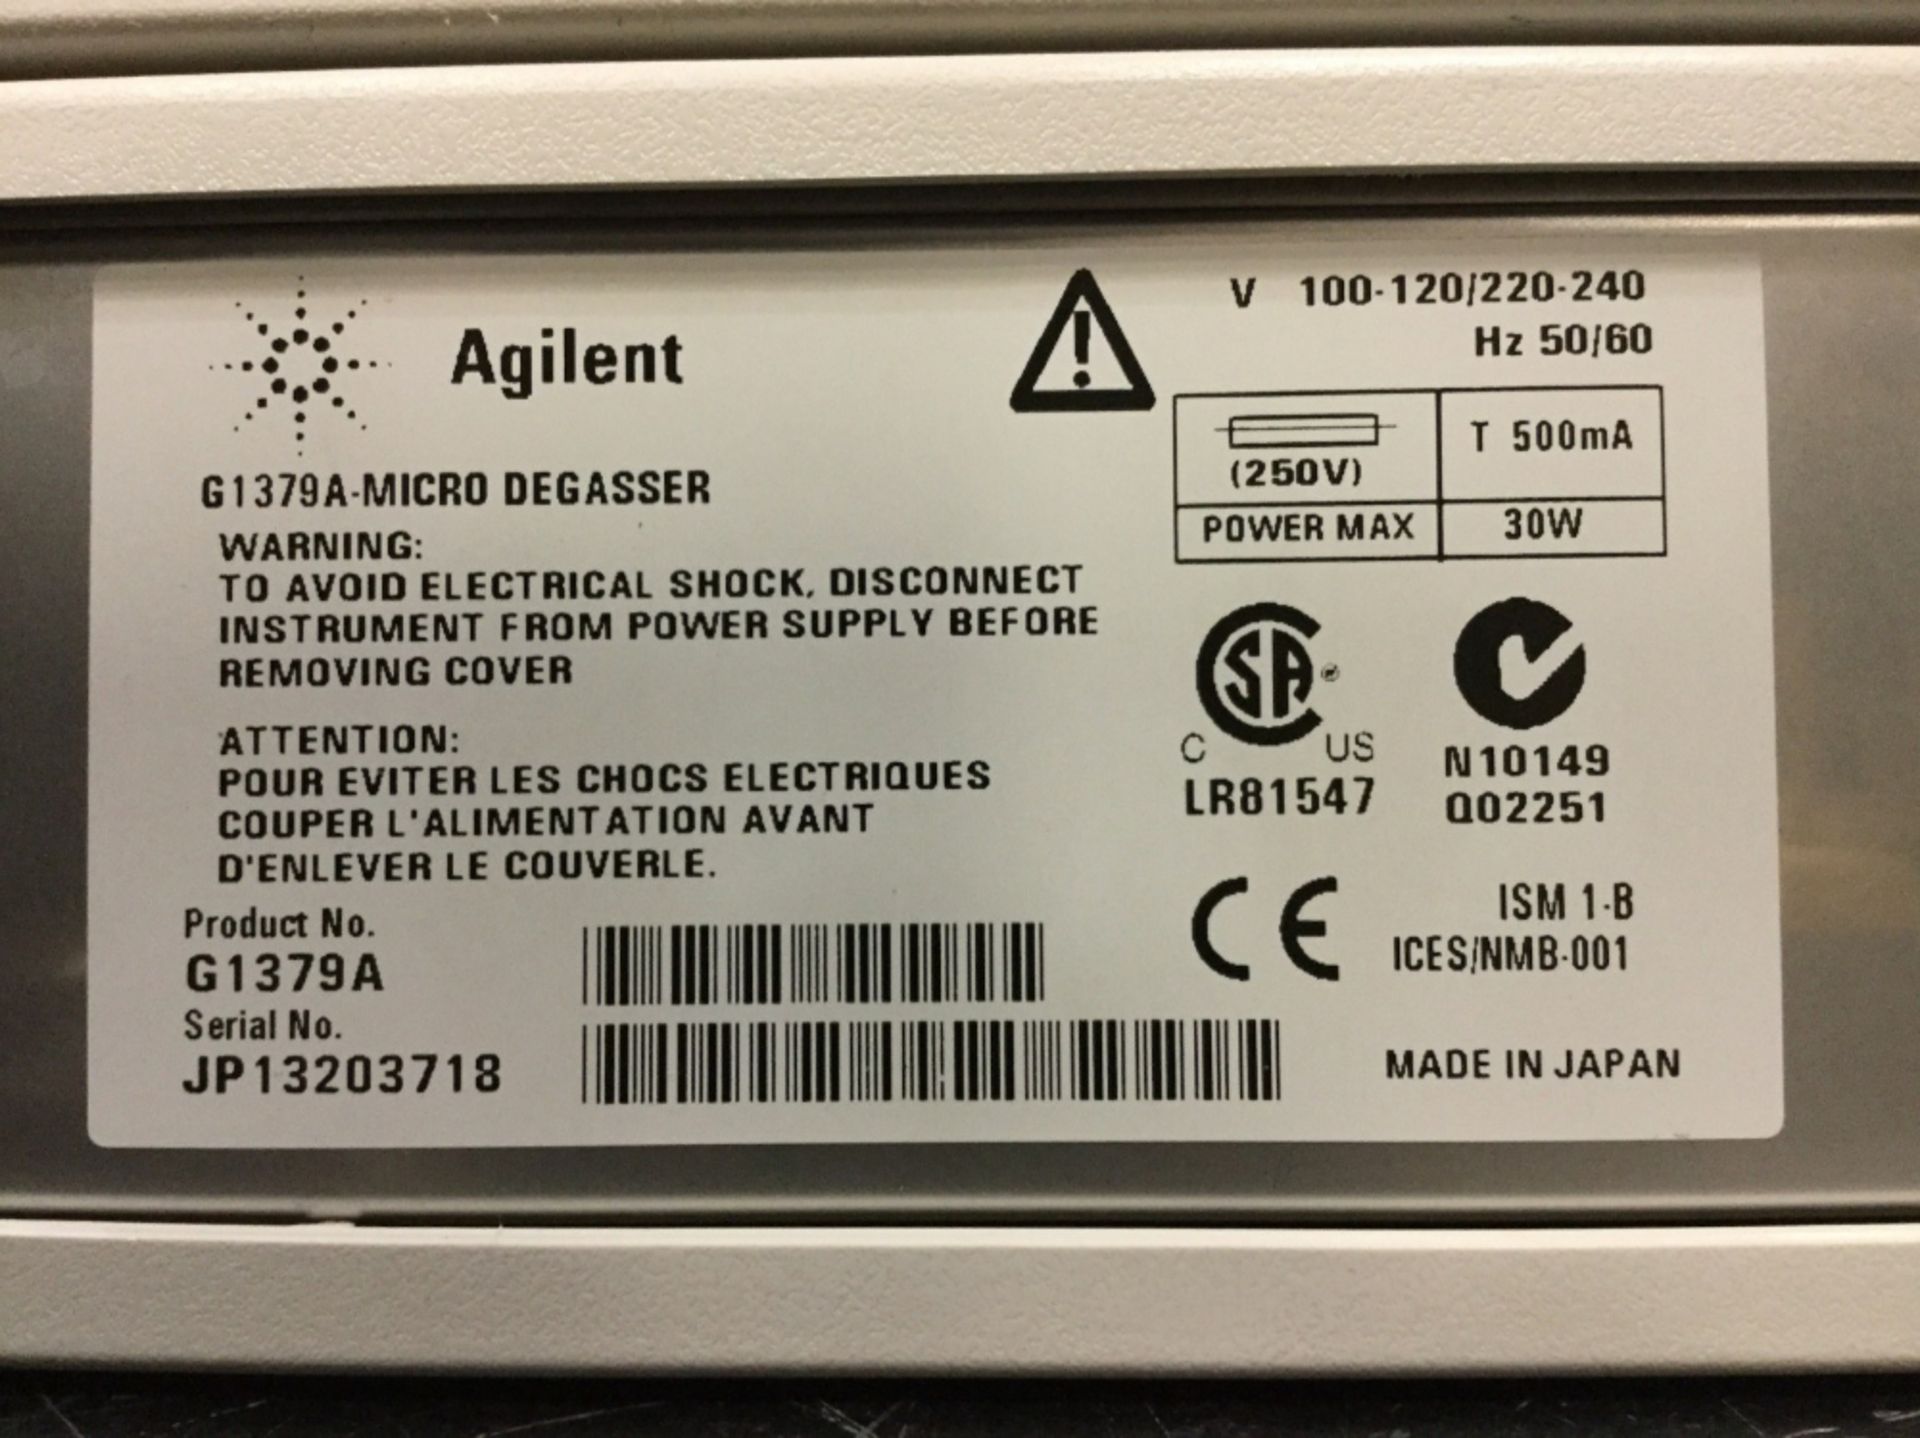 Agilent 1100 Series Micro Degasser With Tray - Image 2 of 2